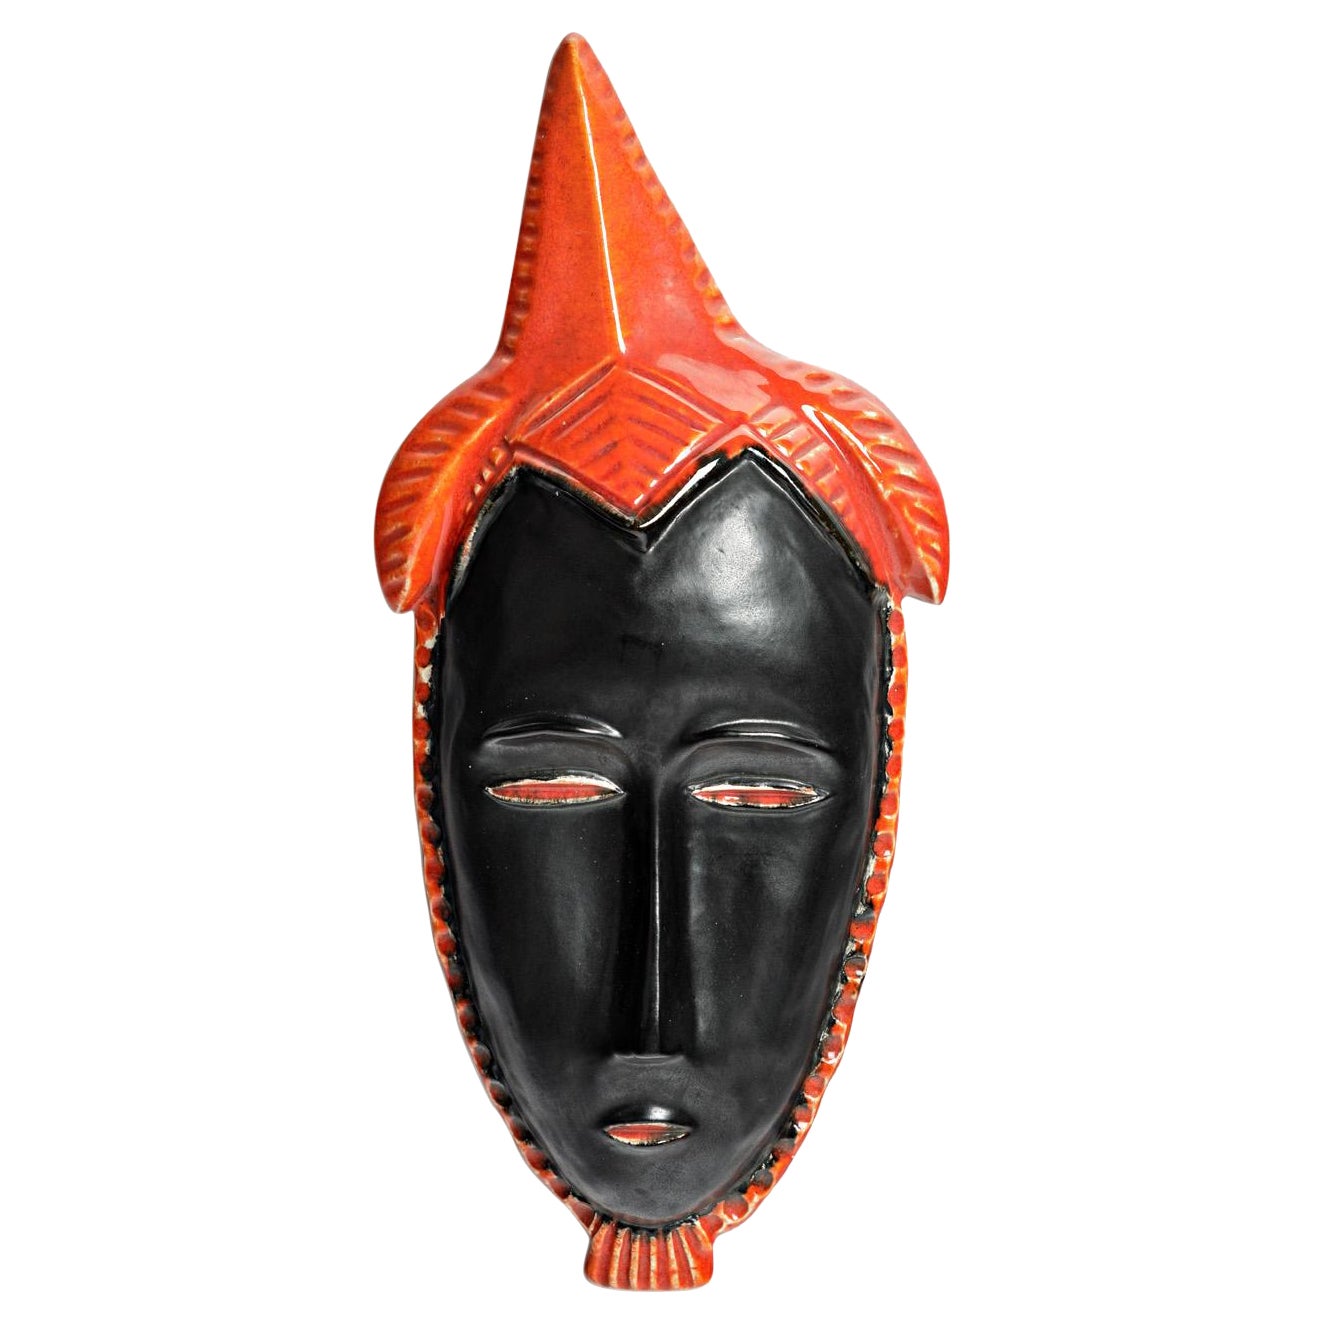 20th Century Large Black and Orange Ceramic Mask by Missy Annecy, circa 1950